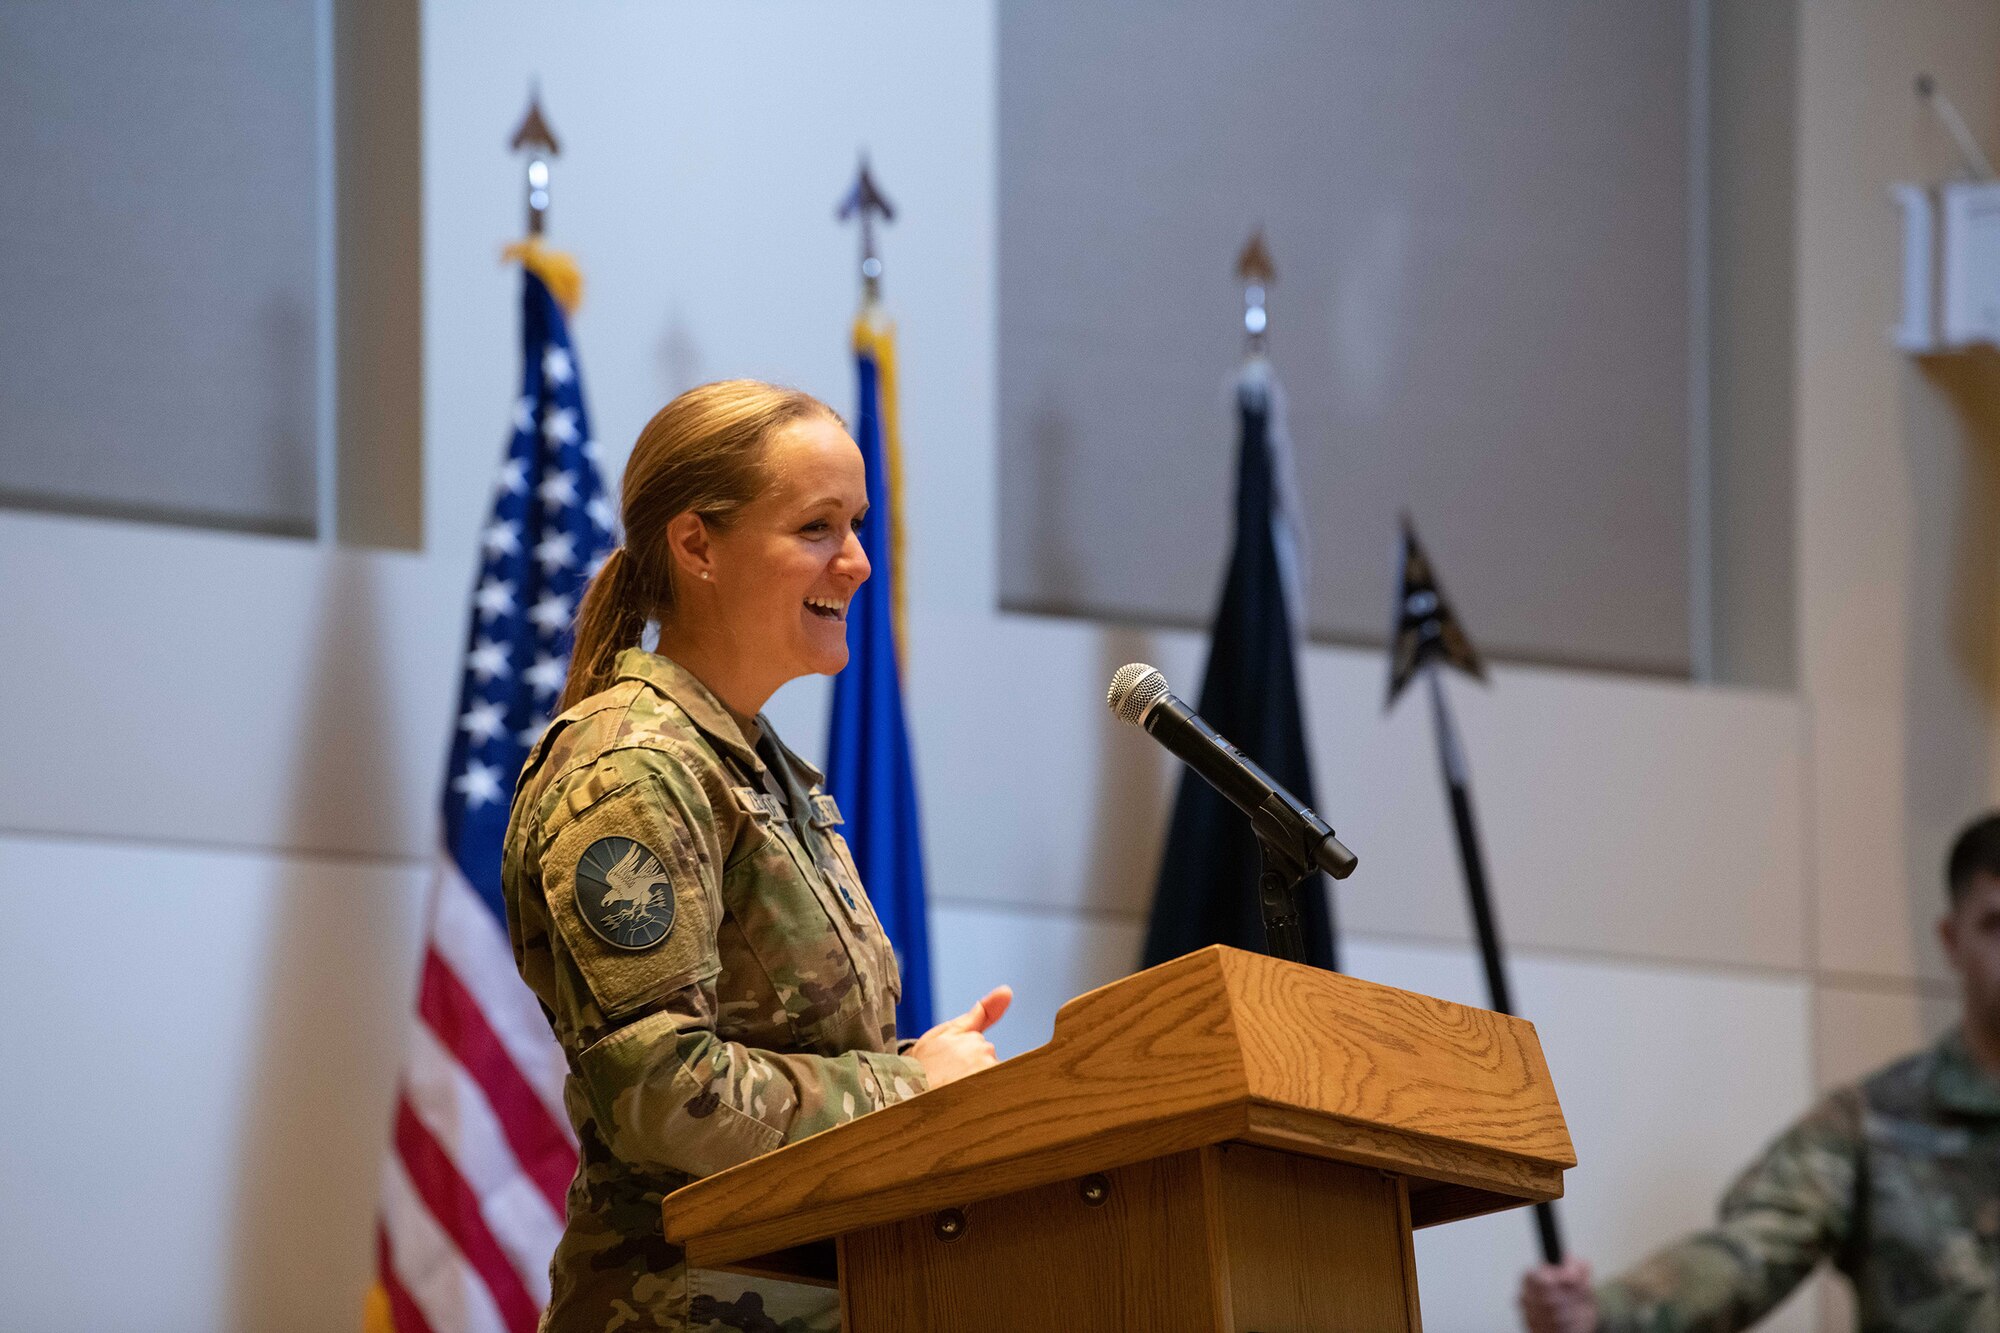 U.S. Space Force Lt. Col. Carrie Zederkof, the Space Delta 4 S-Staff director, addresses the audience after assuming responsibility of DEL 4 S-Staff March 11, 2022, at the Leadership Development Center on Buckley Space Force Base, Colo.